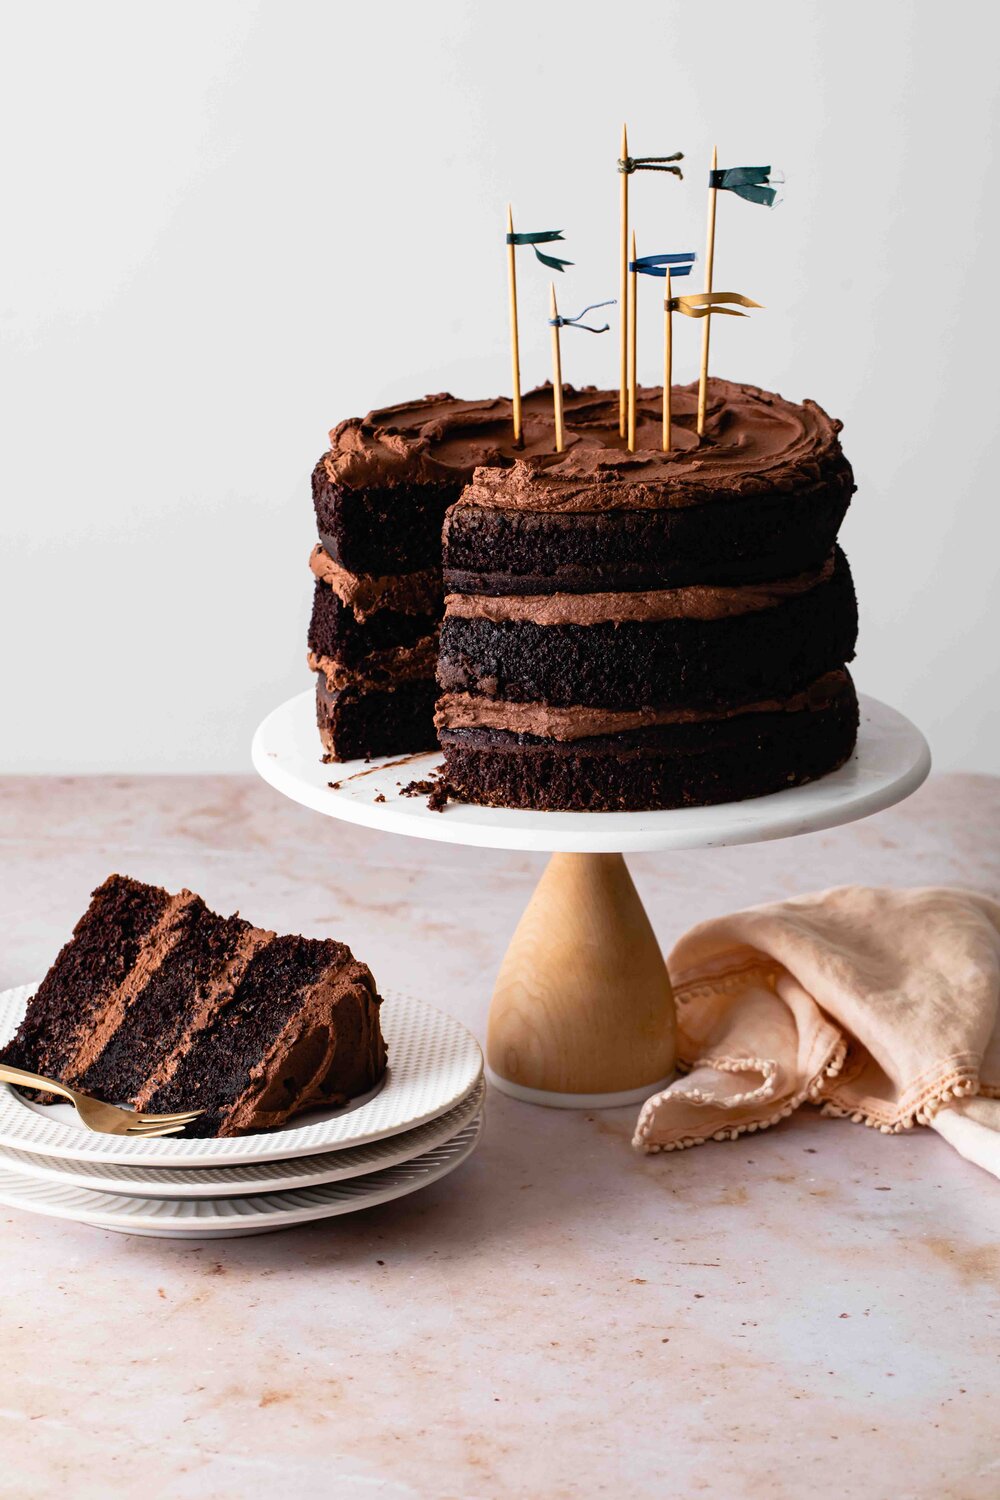 An 8-inch chocolate layer cake with fluffy fudge frosting set on a white and wood cake stand with one slice removed.